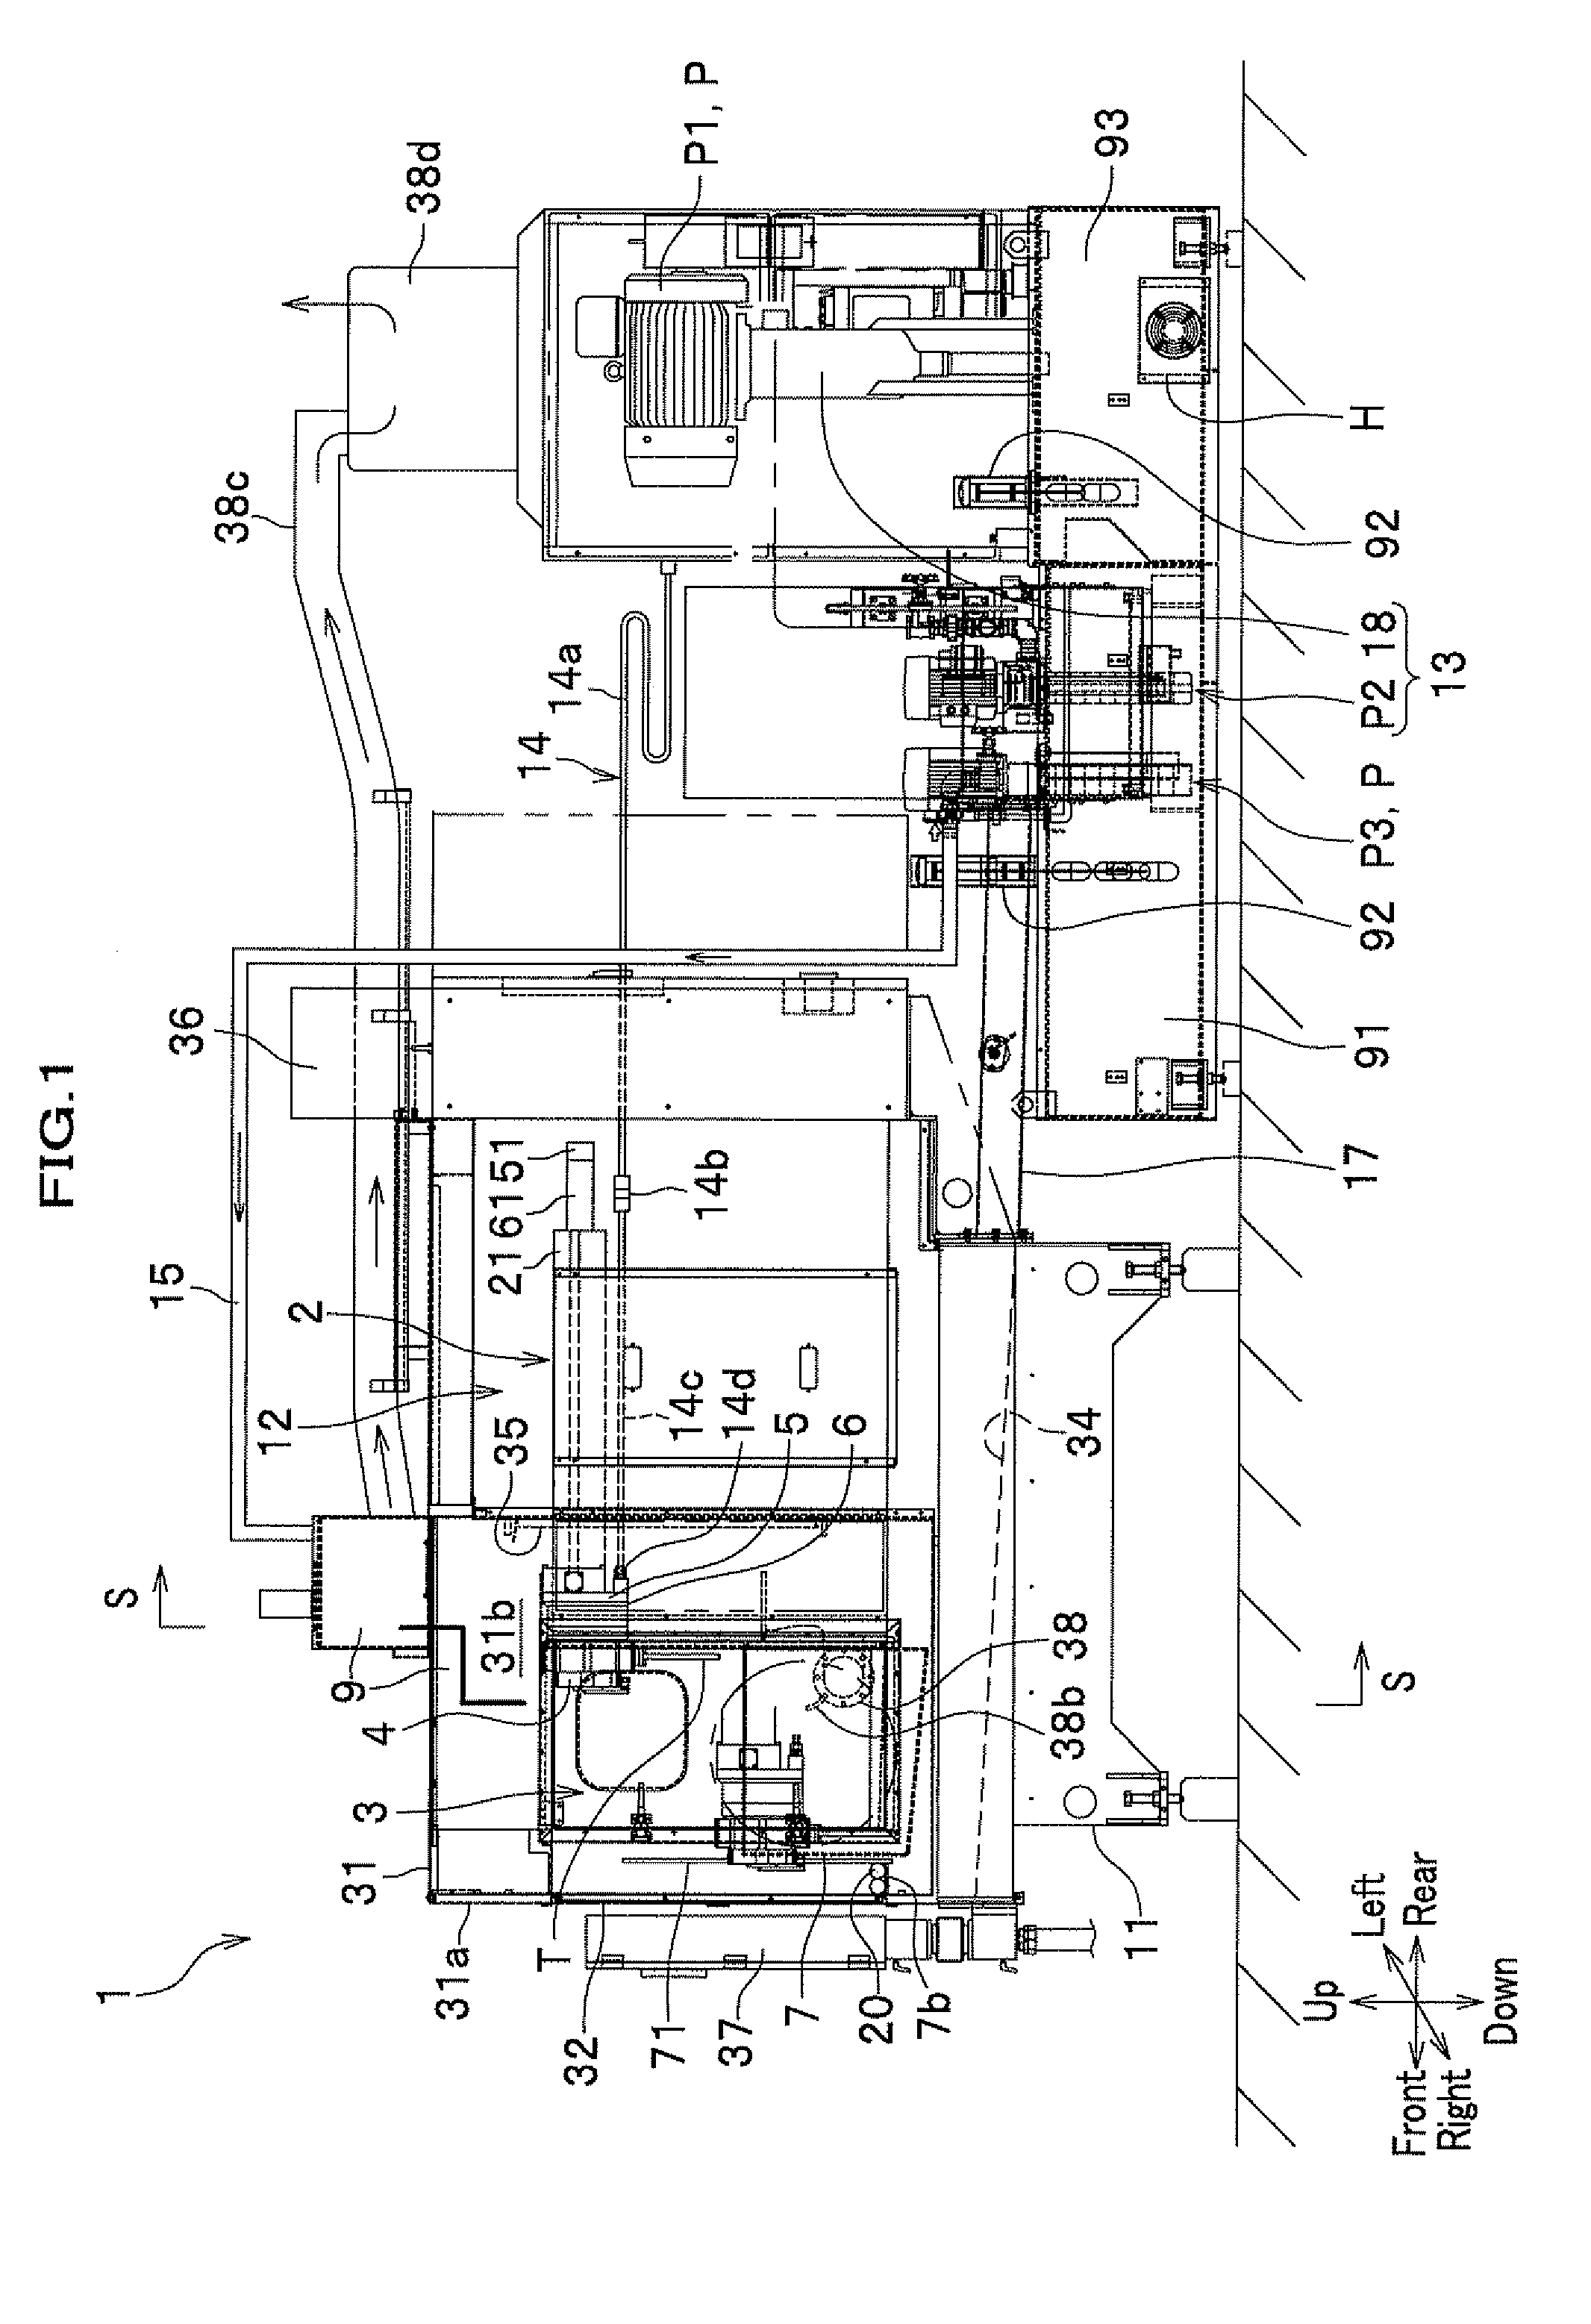 Turret-type cleaning apparatus